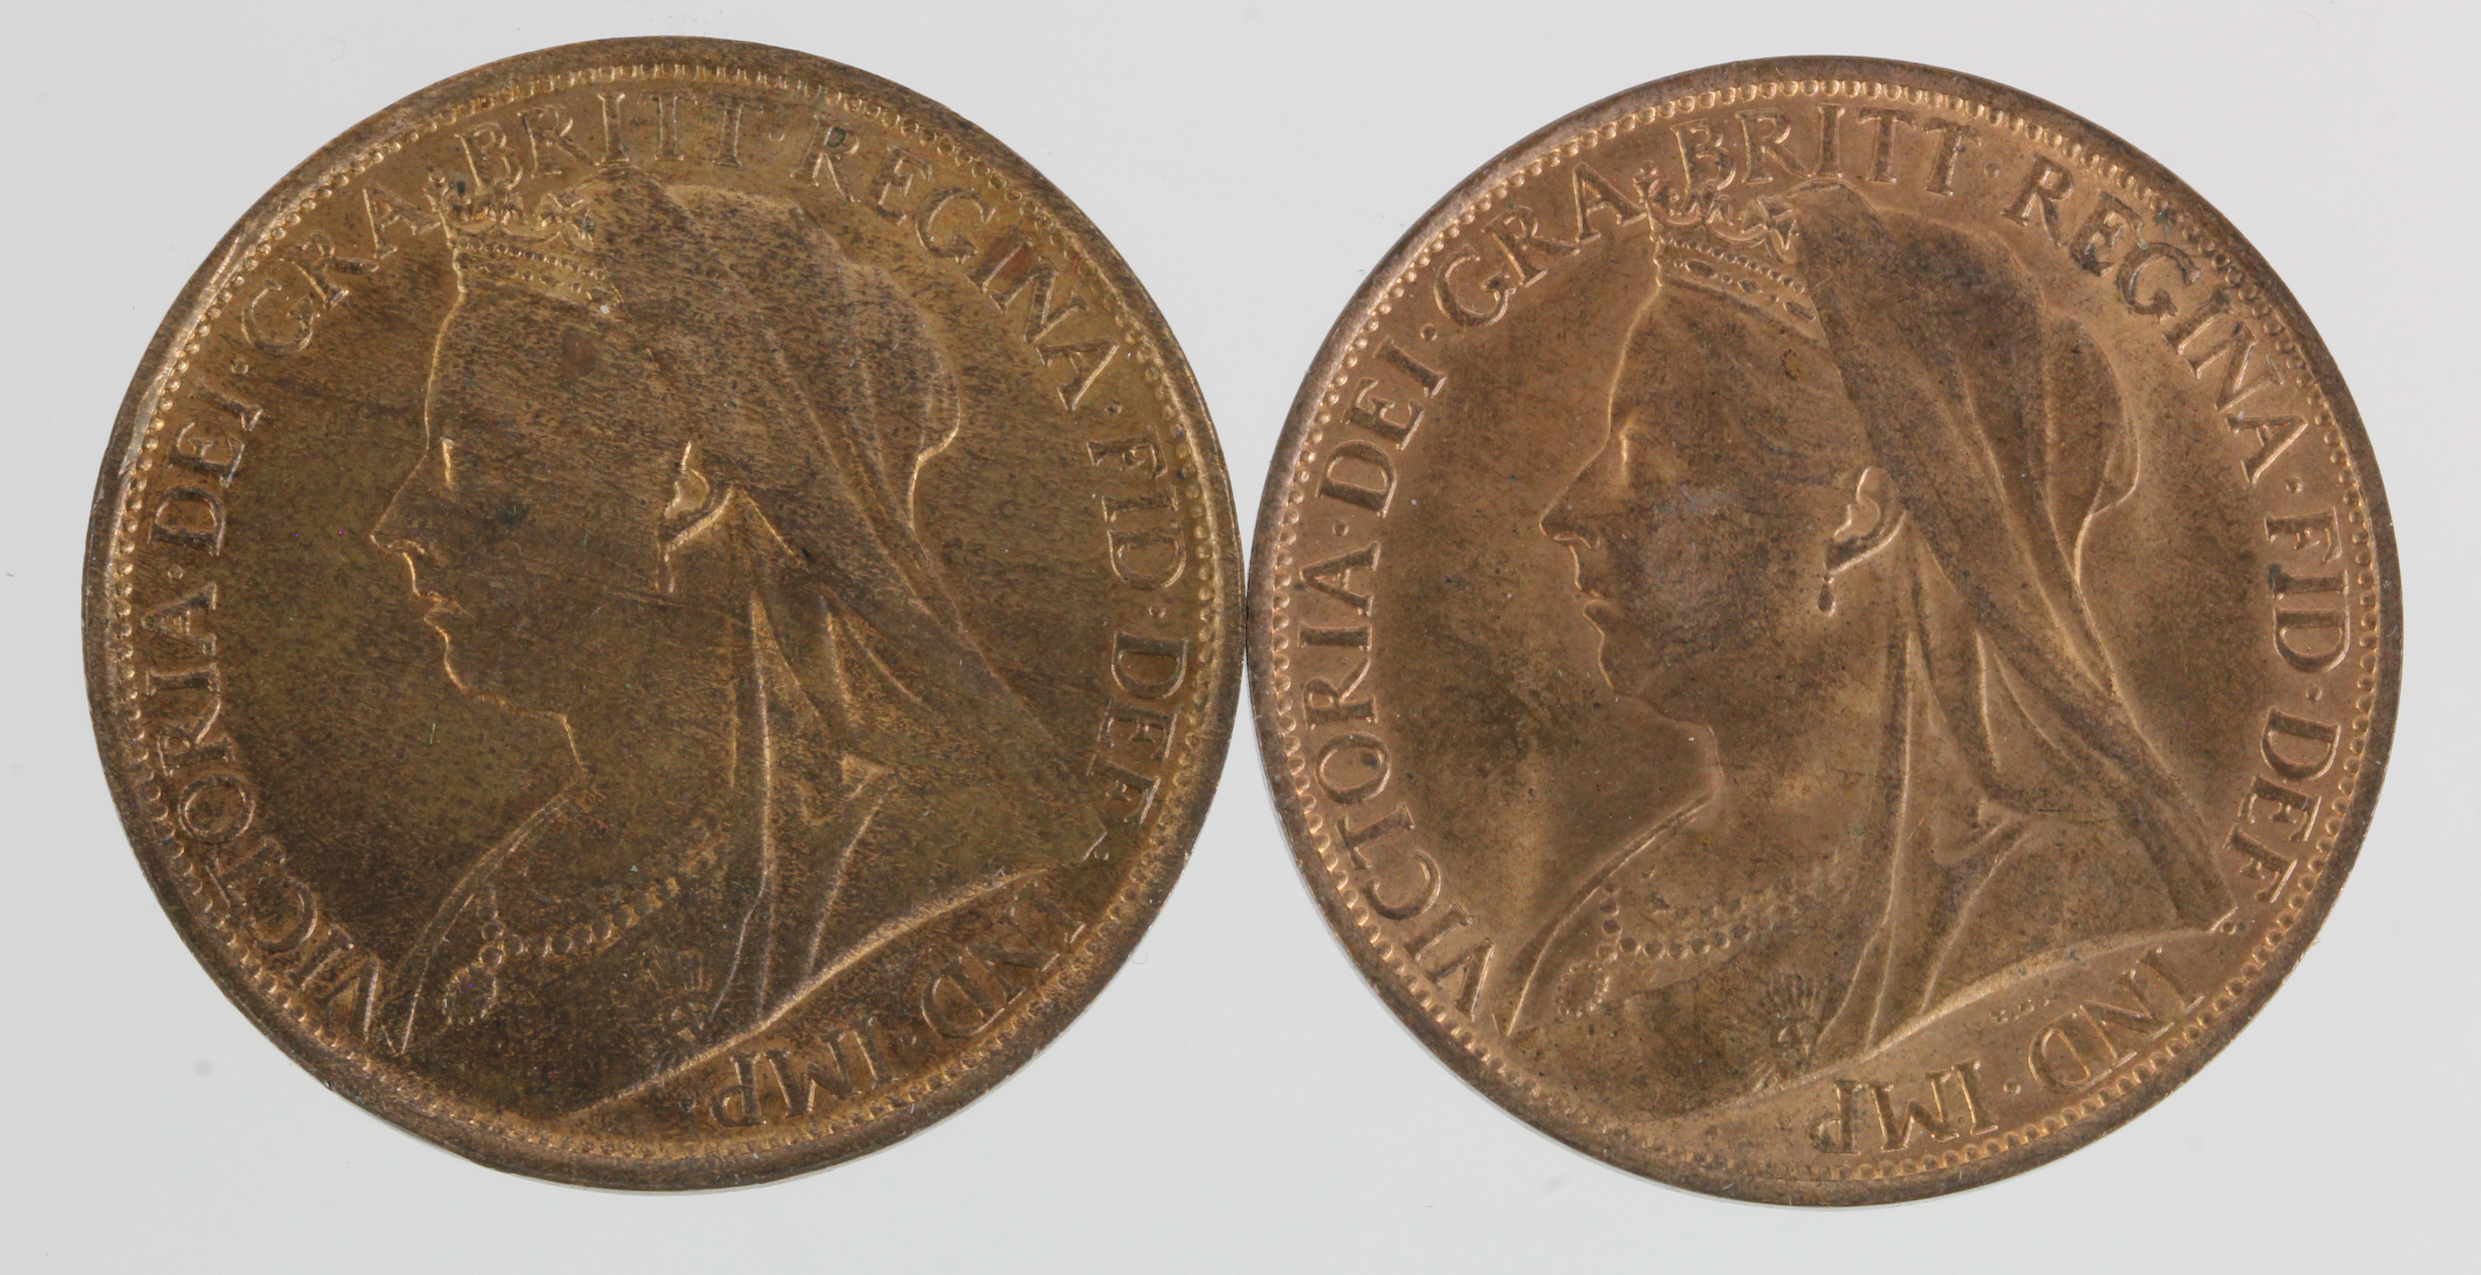 Pennies (2) Queen Victoria veiled hd: 1896 and 1899, GEF-AU with lustre